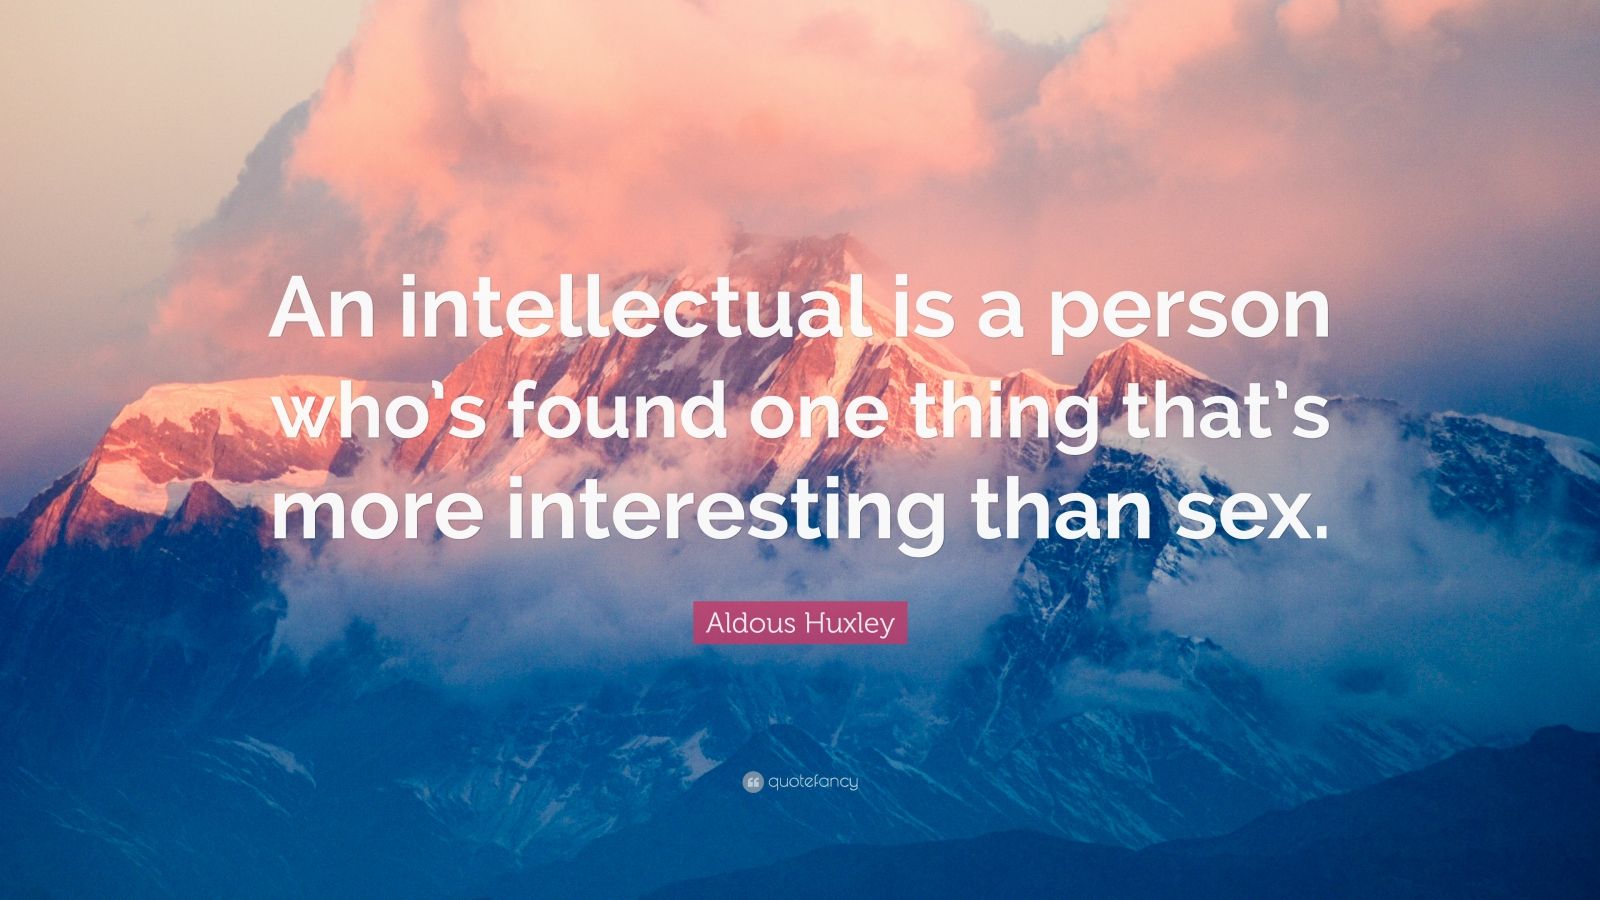 Aldous Huxley Quote: "An intellectual is a person who's ...